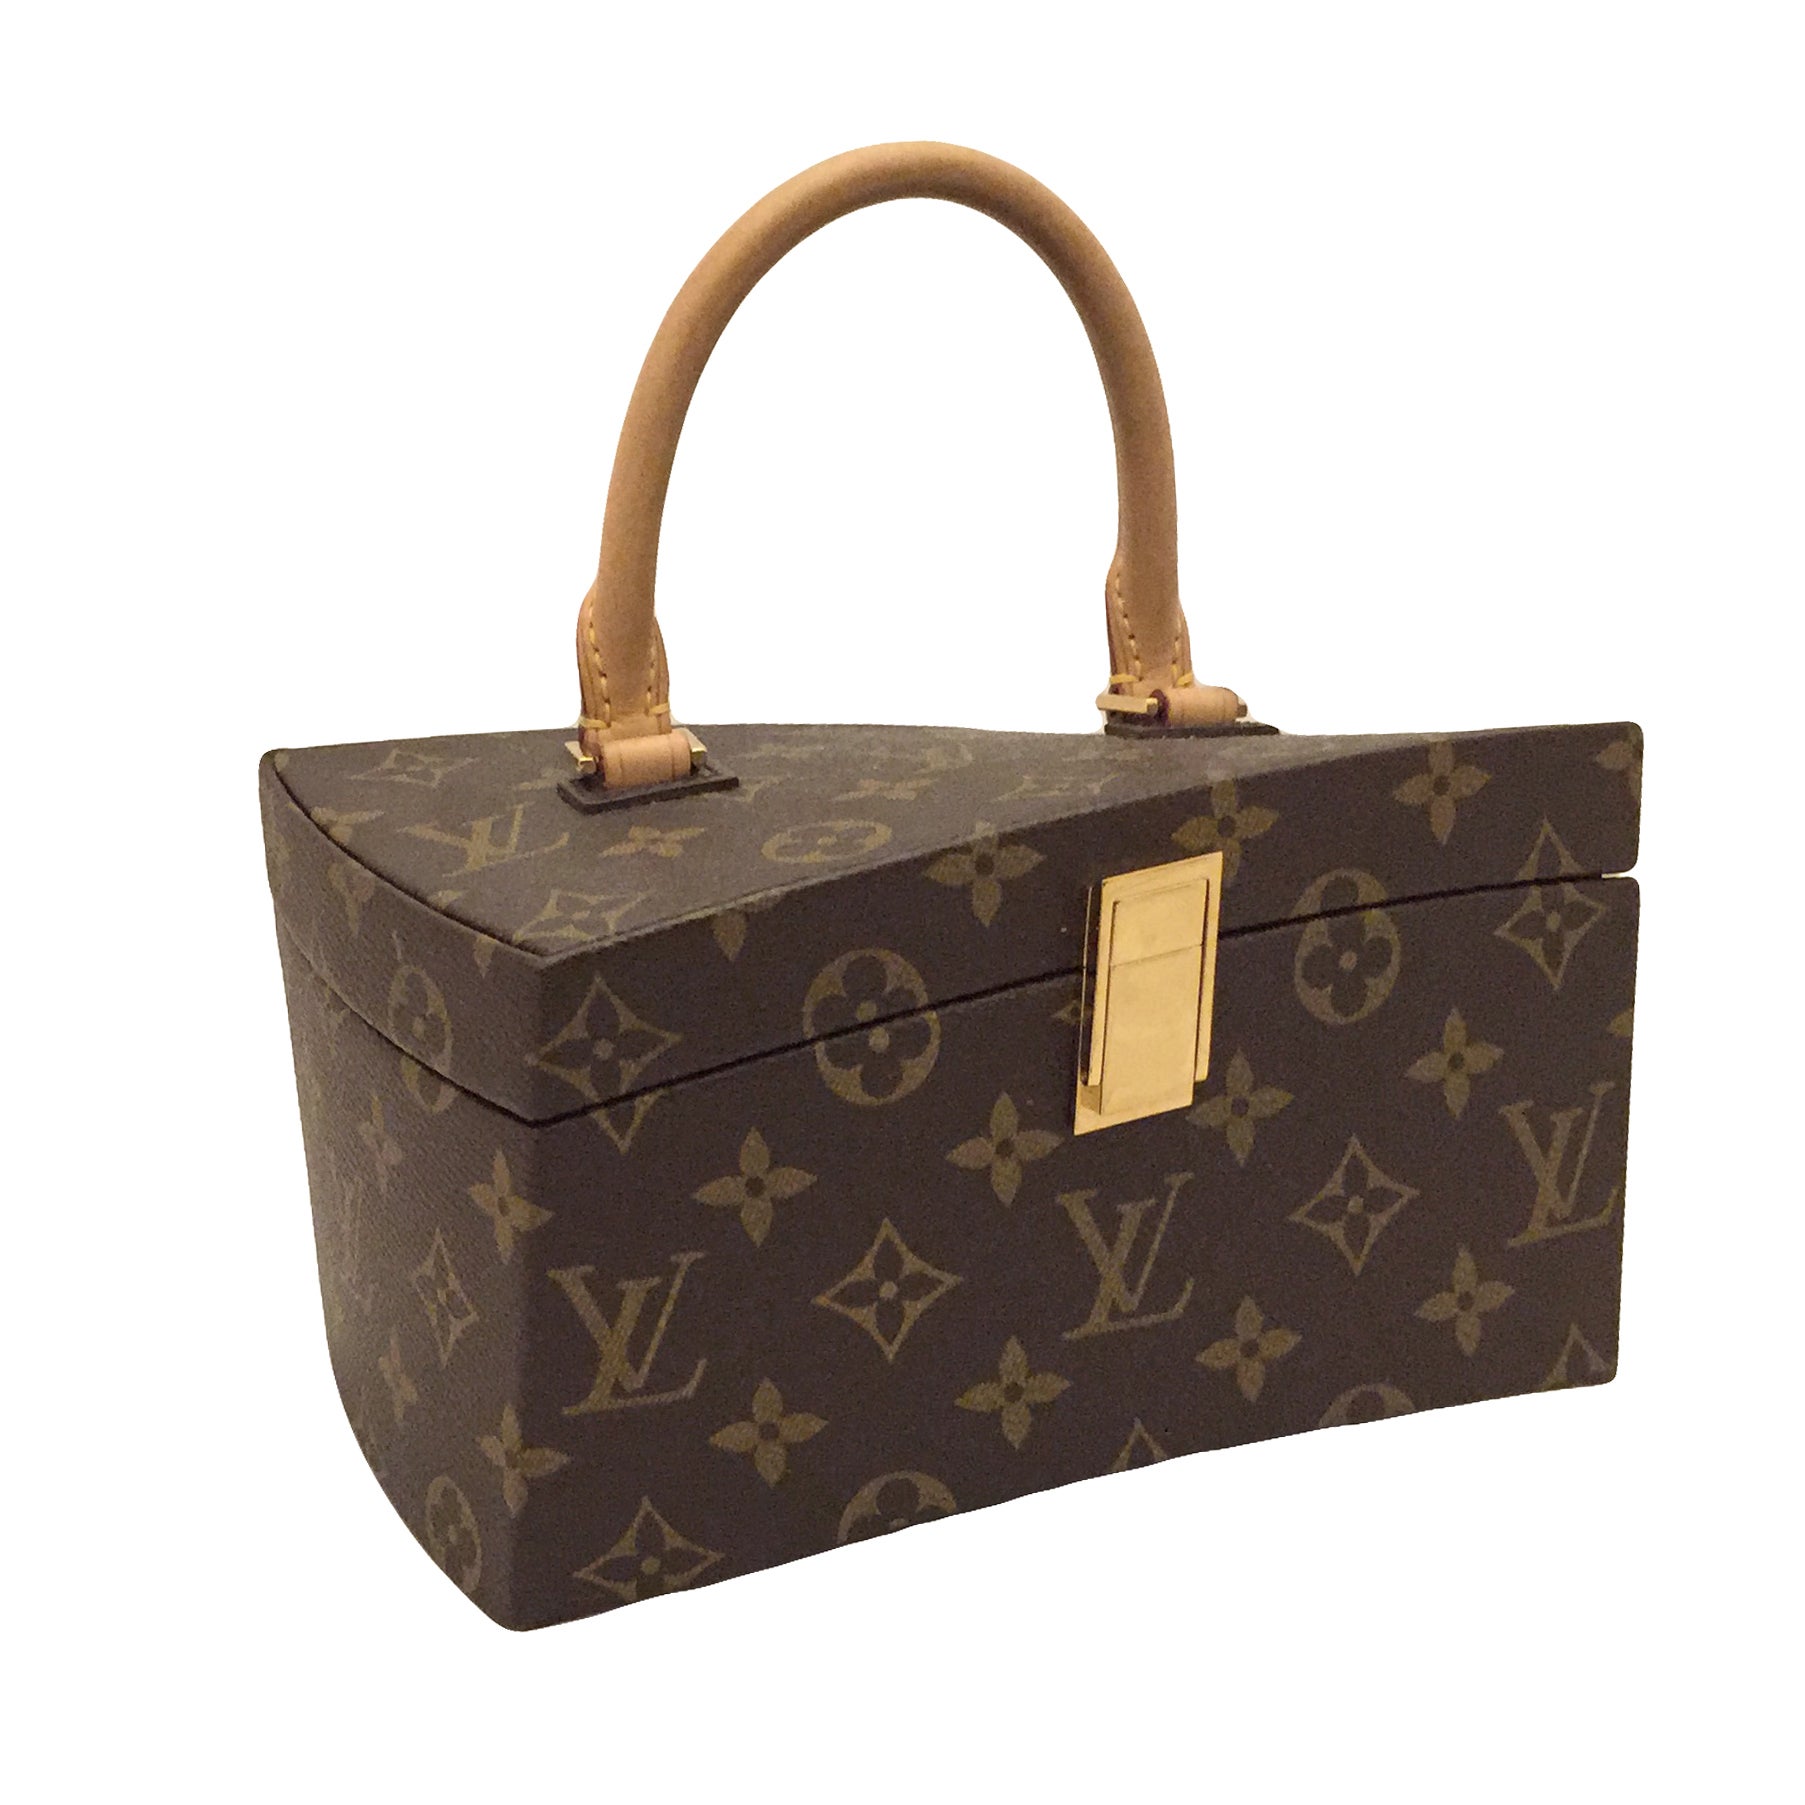 Louis Vuitton's Iconic Trunks Get Twisted